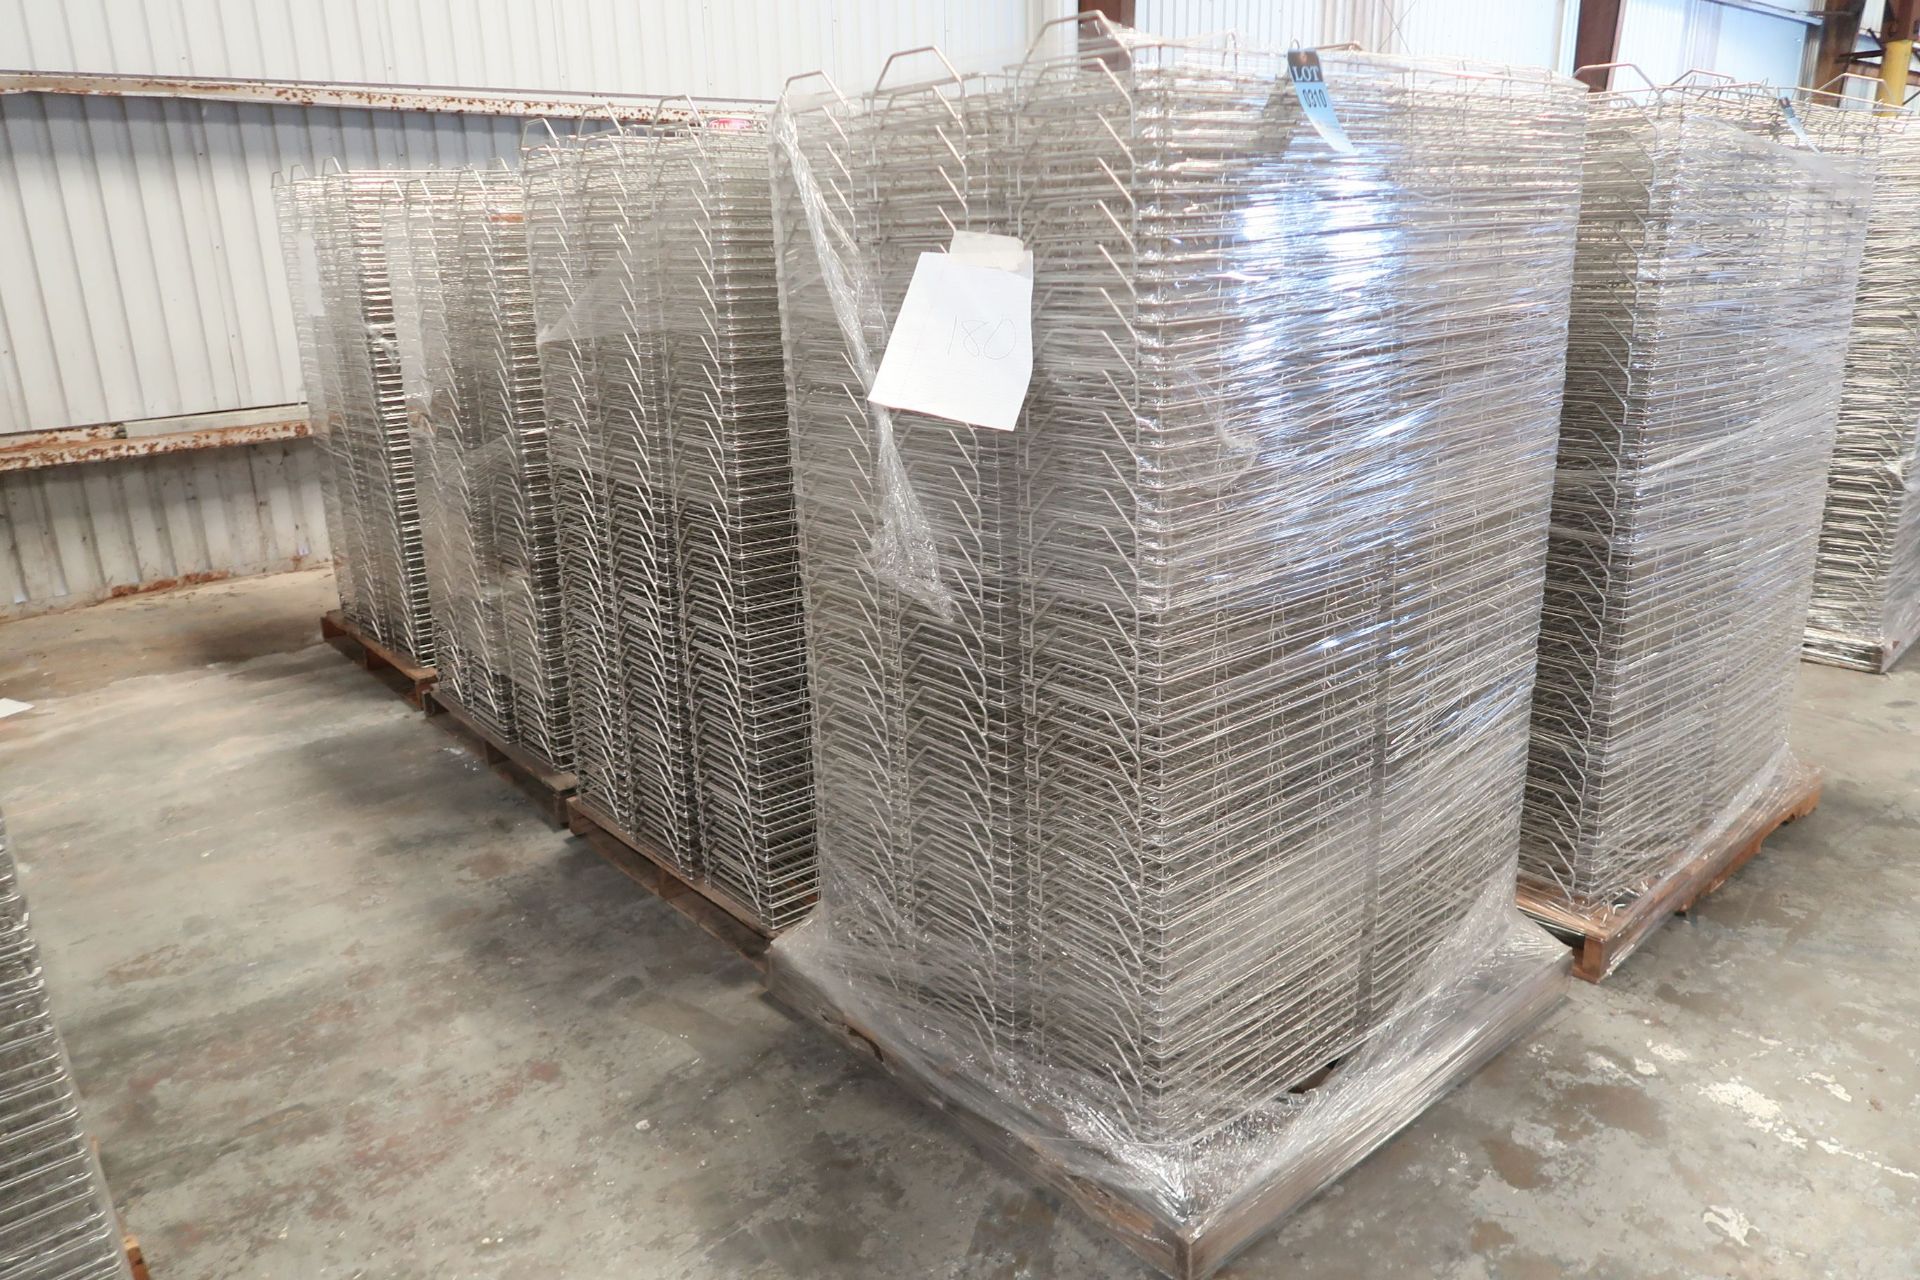 (LOT) (4) SKIDS, 12" X 22" X 2" D STAINLESS WIRE PART TRAYS, APPROX. (170) PER SKID, APPROX. (680)